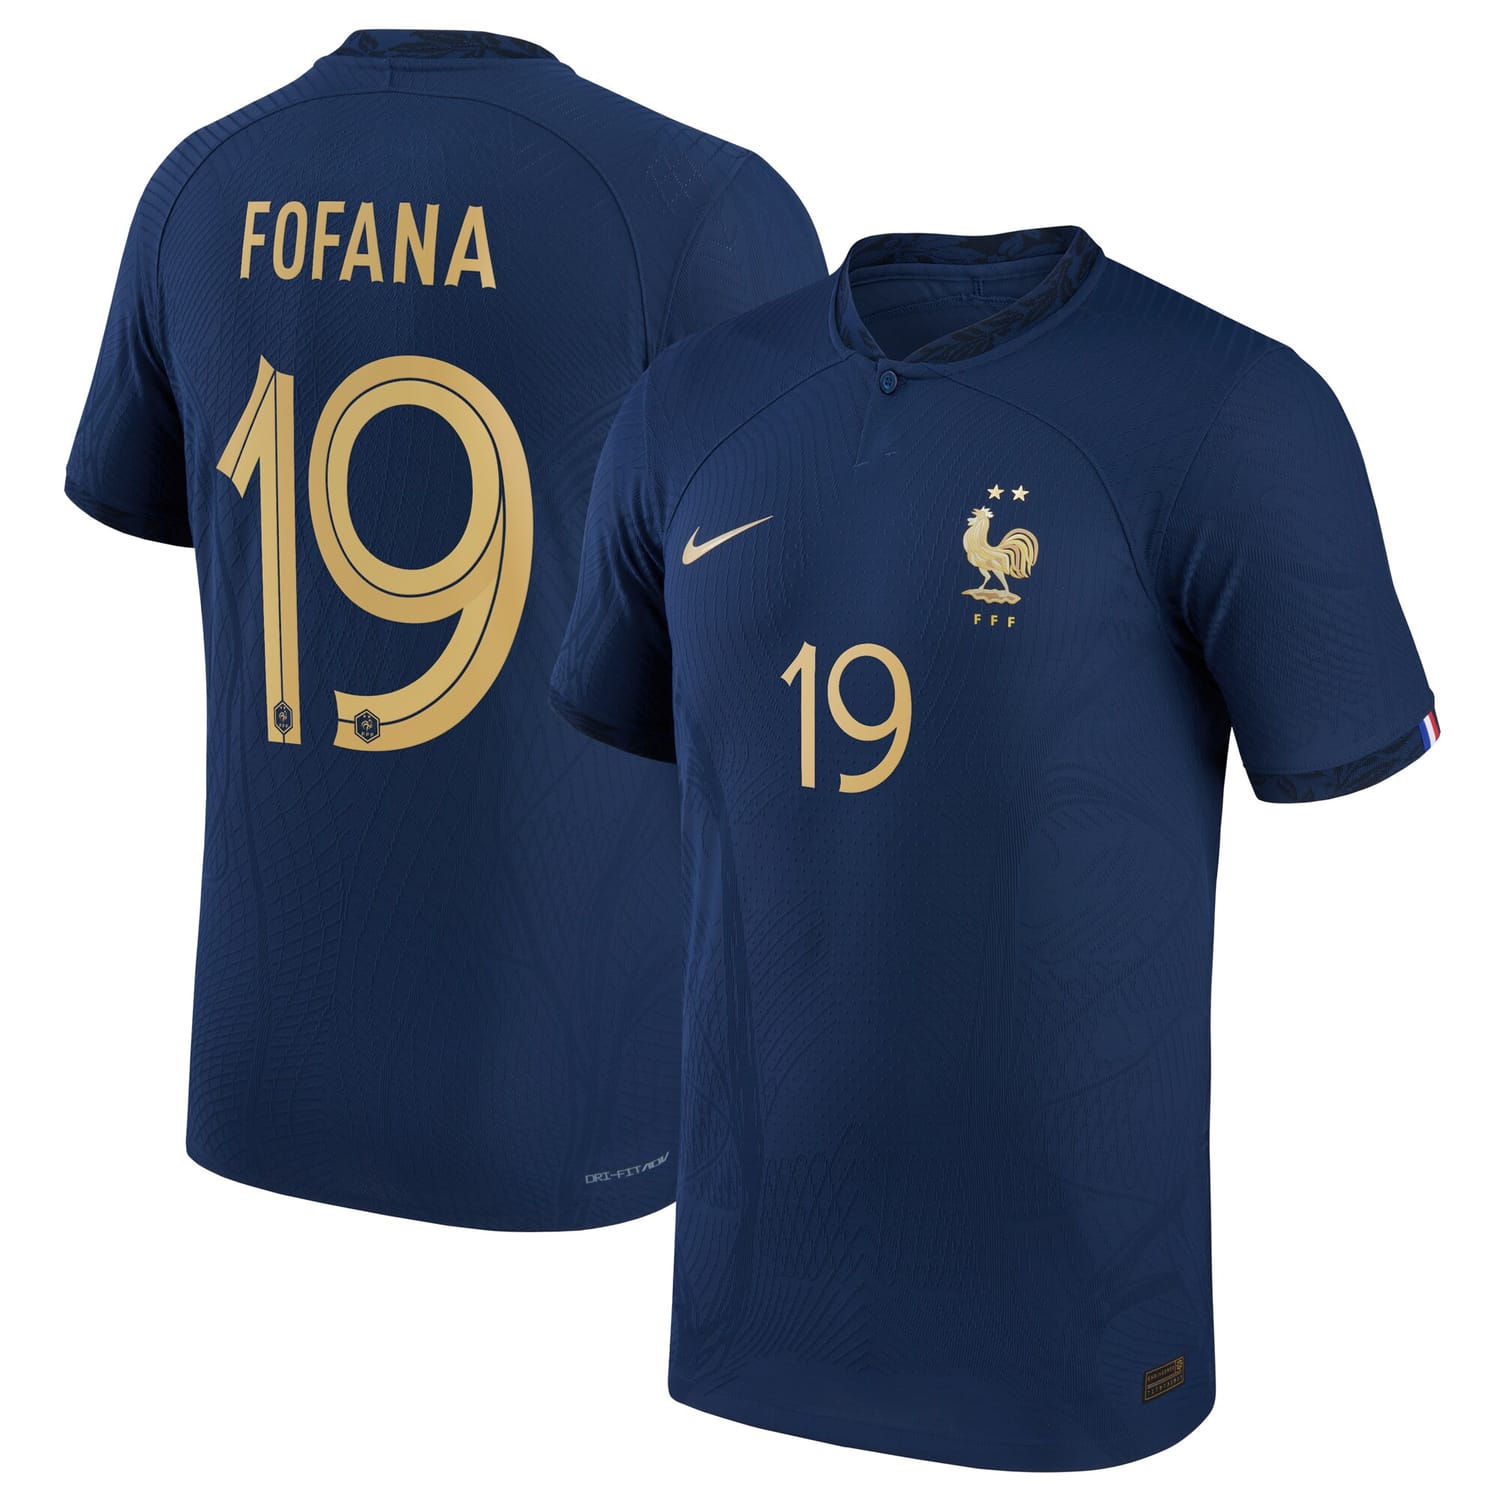 France National Team Home Authentic Jersey Shirt 2022 player Fofana 19 printing for Men